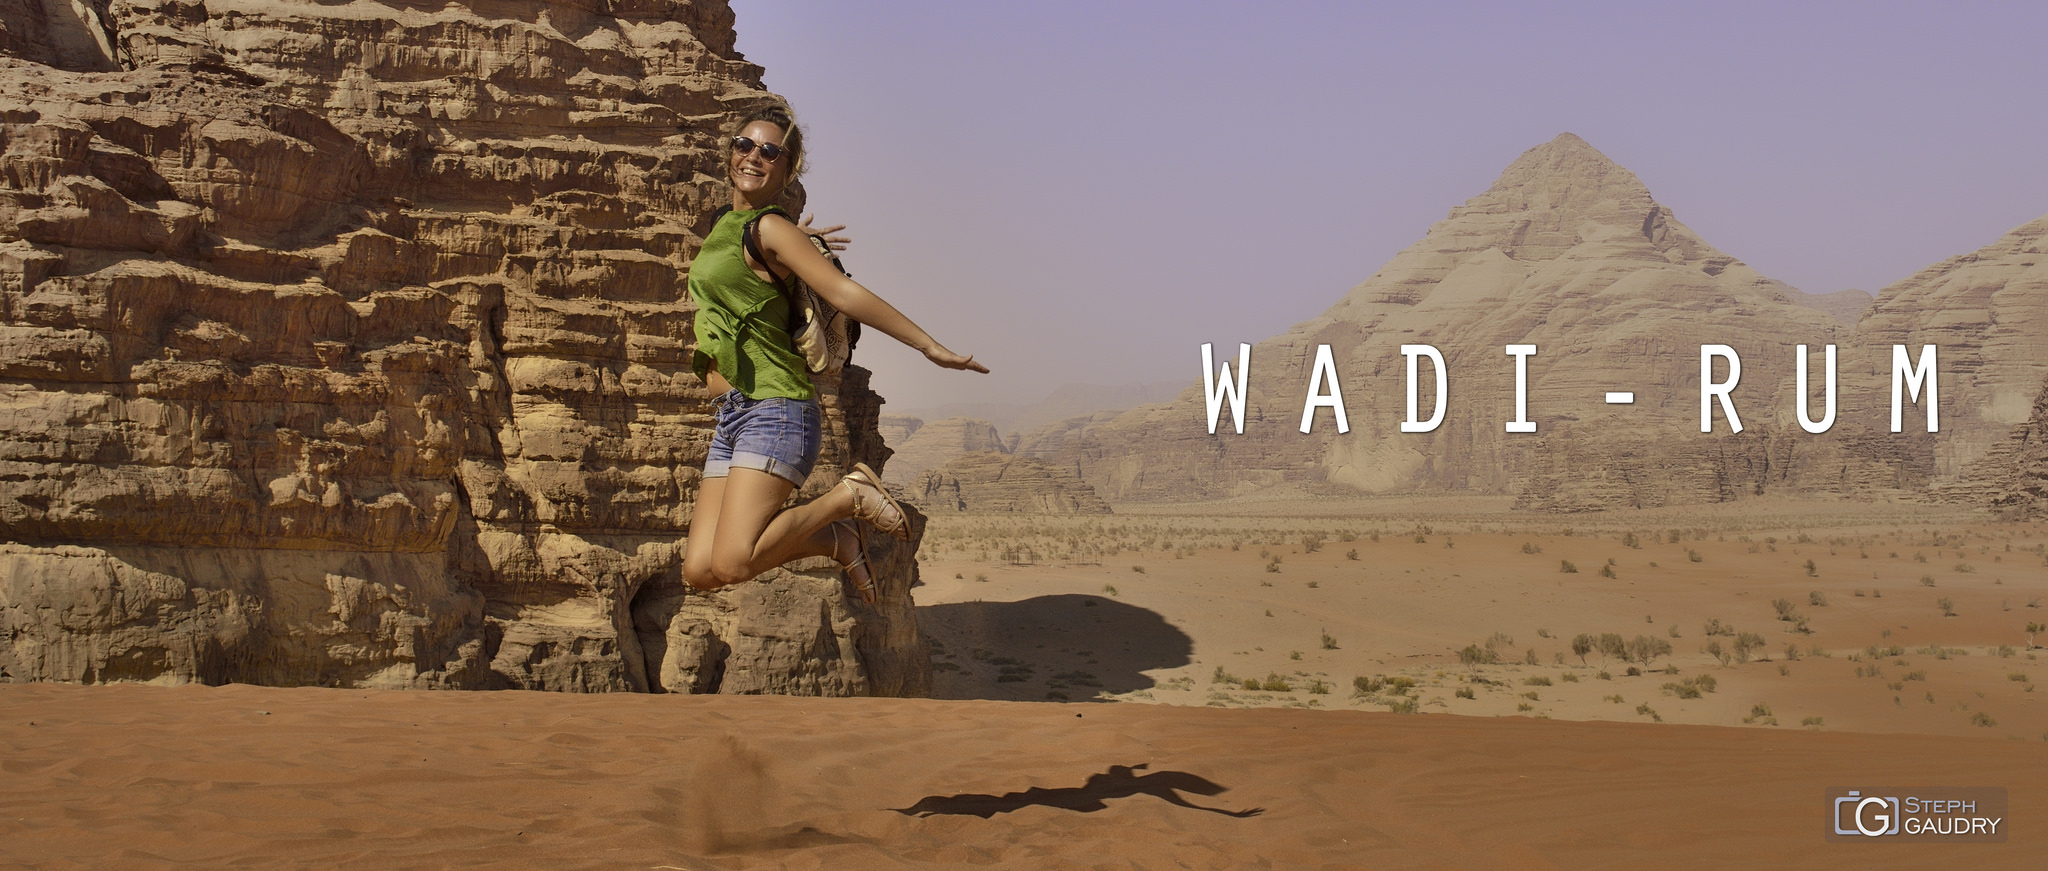 Ma sélection / Wadi-Rum - Lucy in the sky with diamonds